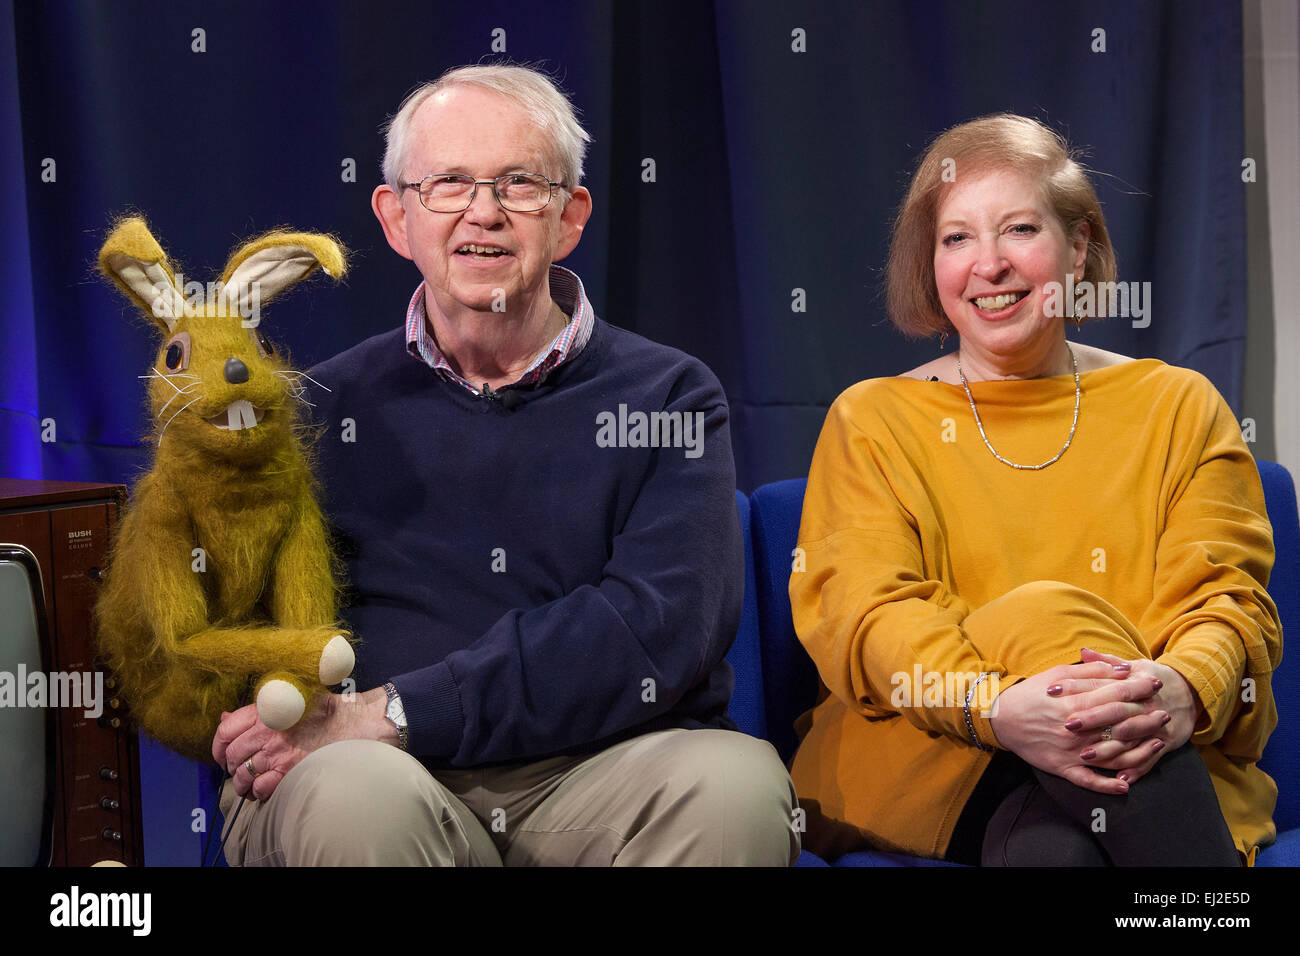 Walsall, West Midlands, UK. 20 March 2015. Writer performer Gail Renard at a recording of ‘The David Hamilton Show’ for Big Centre TV. Hosted by presenter and broadcaster ‘Diddy’ David Hamilton the show features famous personalities from across the music and television spectrum. Credit:  John Henshall / Alamy Live News PER0509 Stock Photo